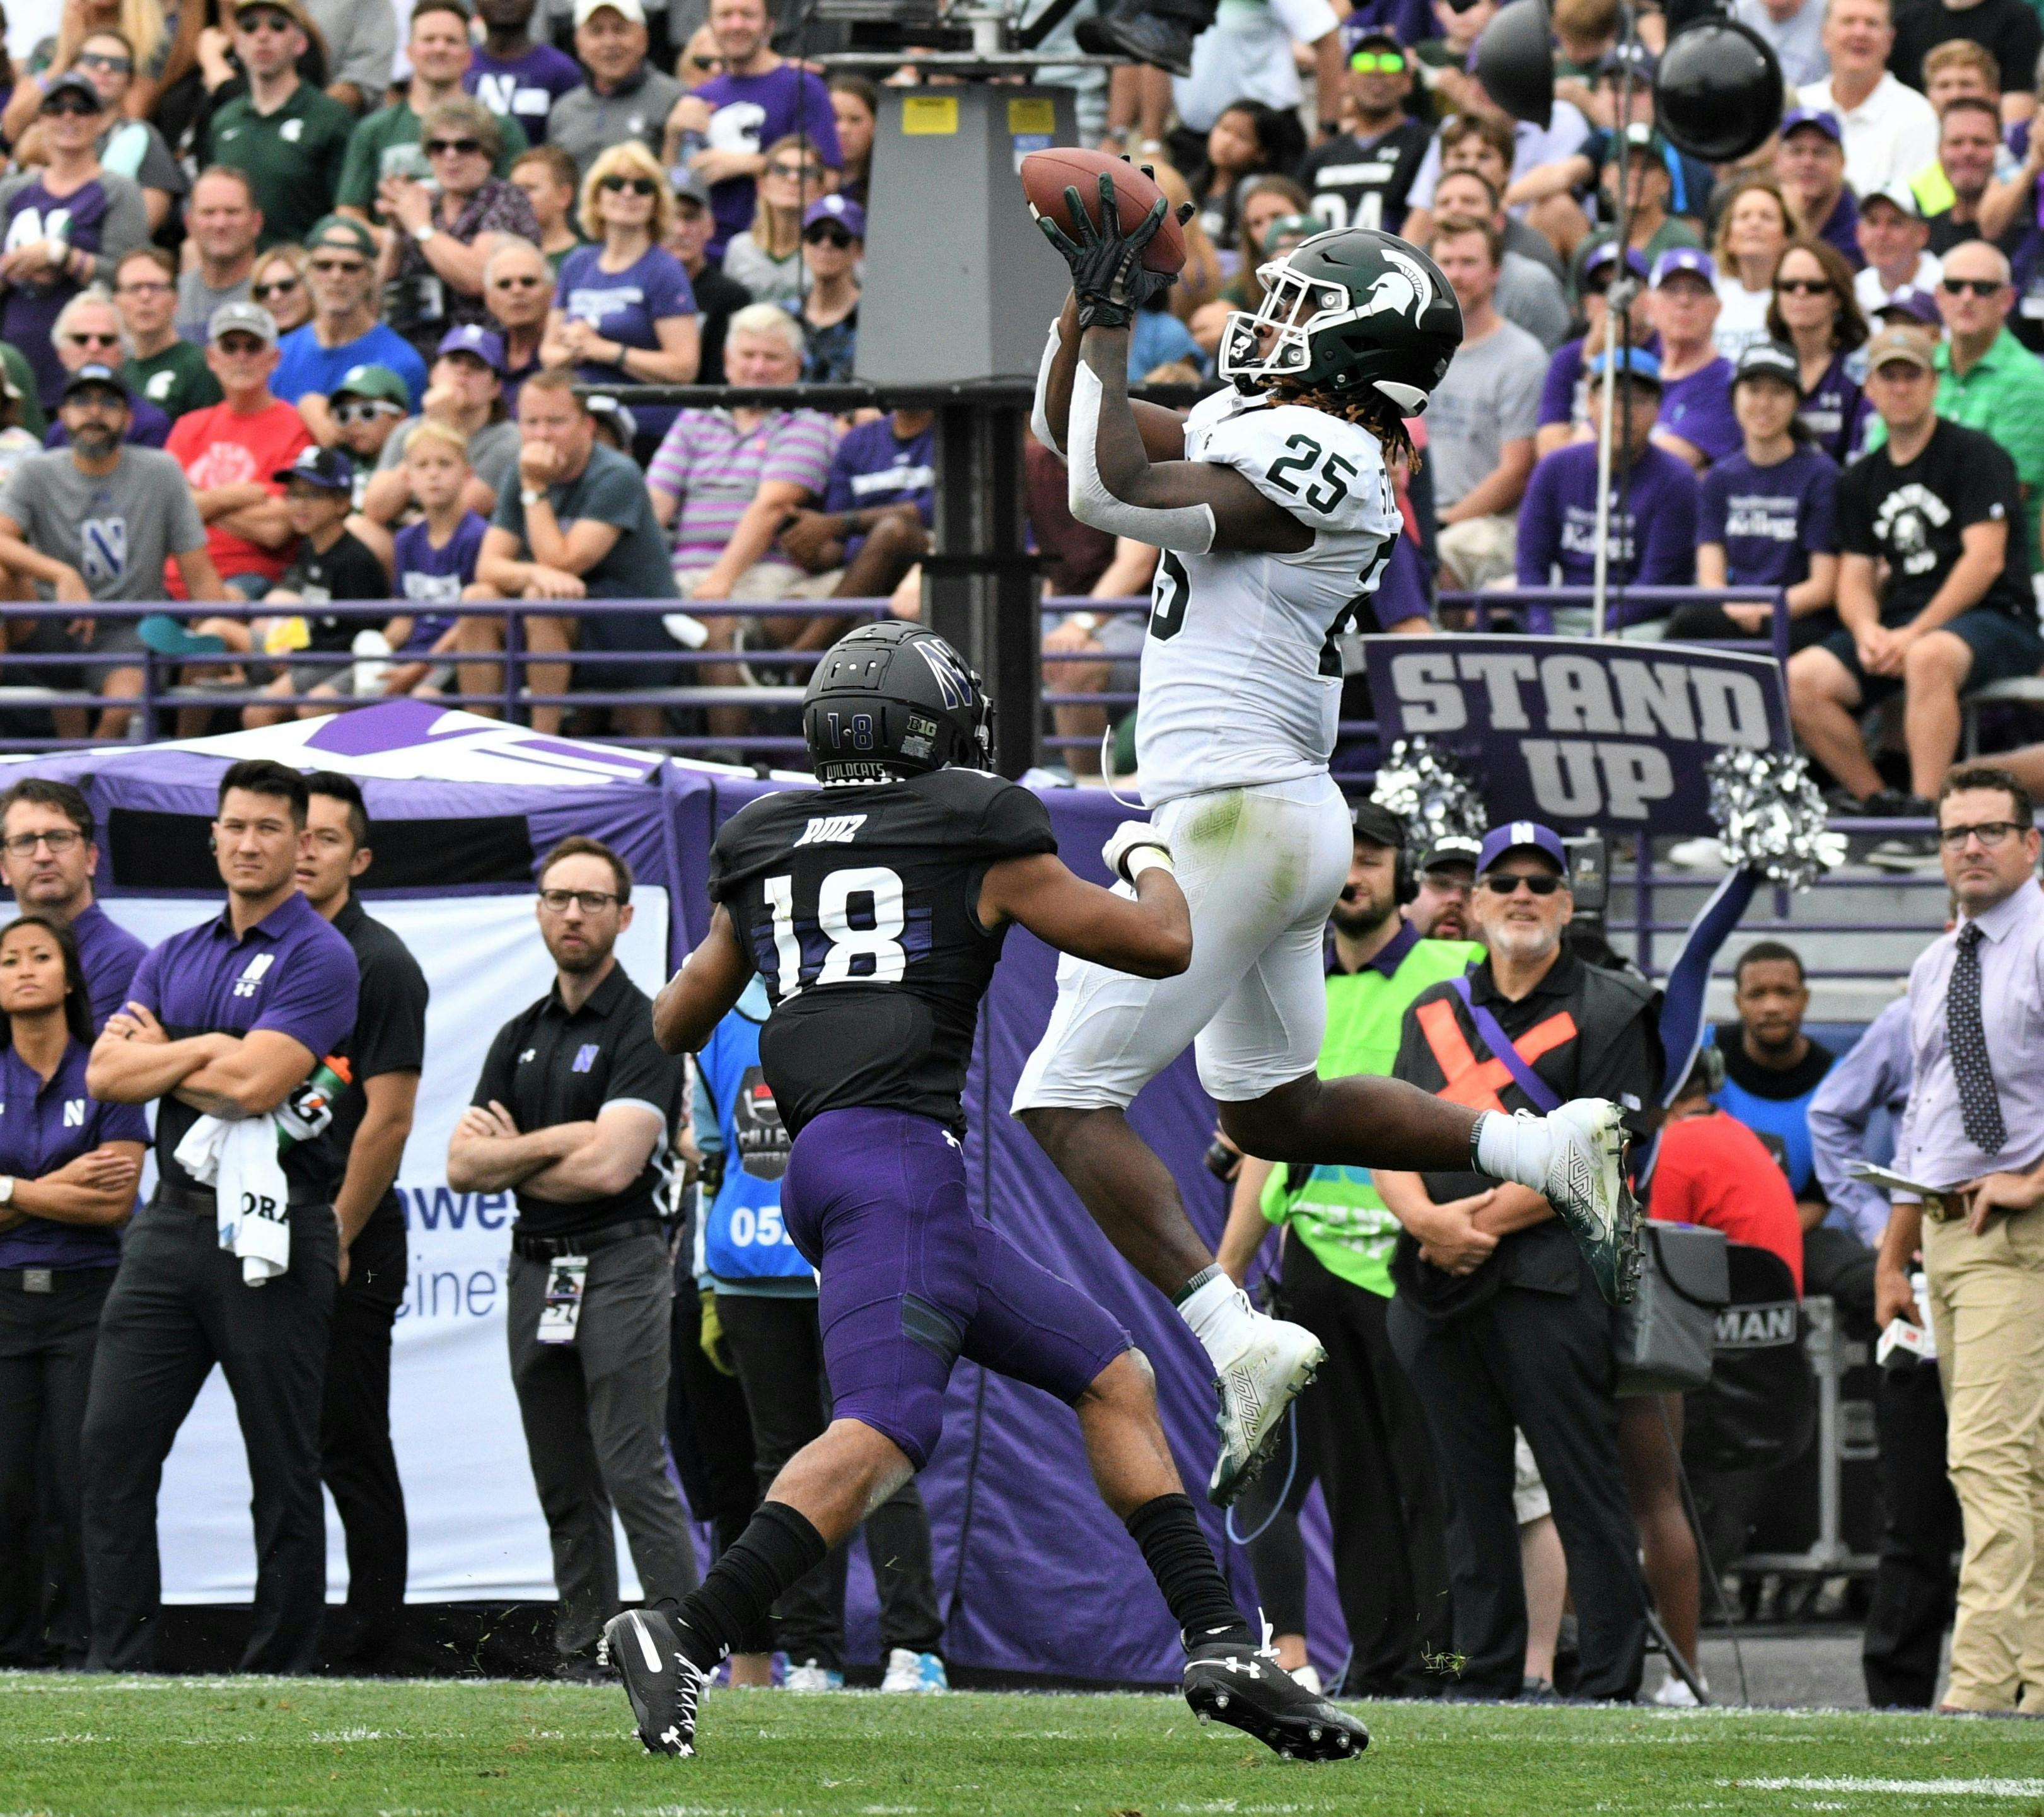 <p>Darrell Stewart Jr. (25) makes a catch during the game against Northwestern on Sept. 21, 2019 at Ryan Field. MSU defeated Northwestern, 31-10.</p>